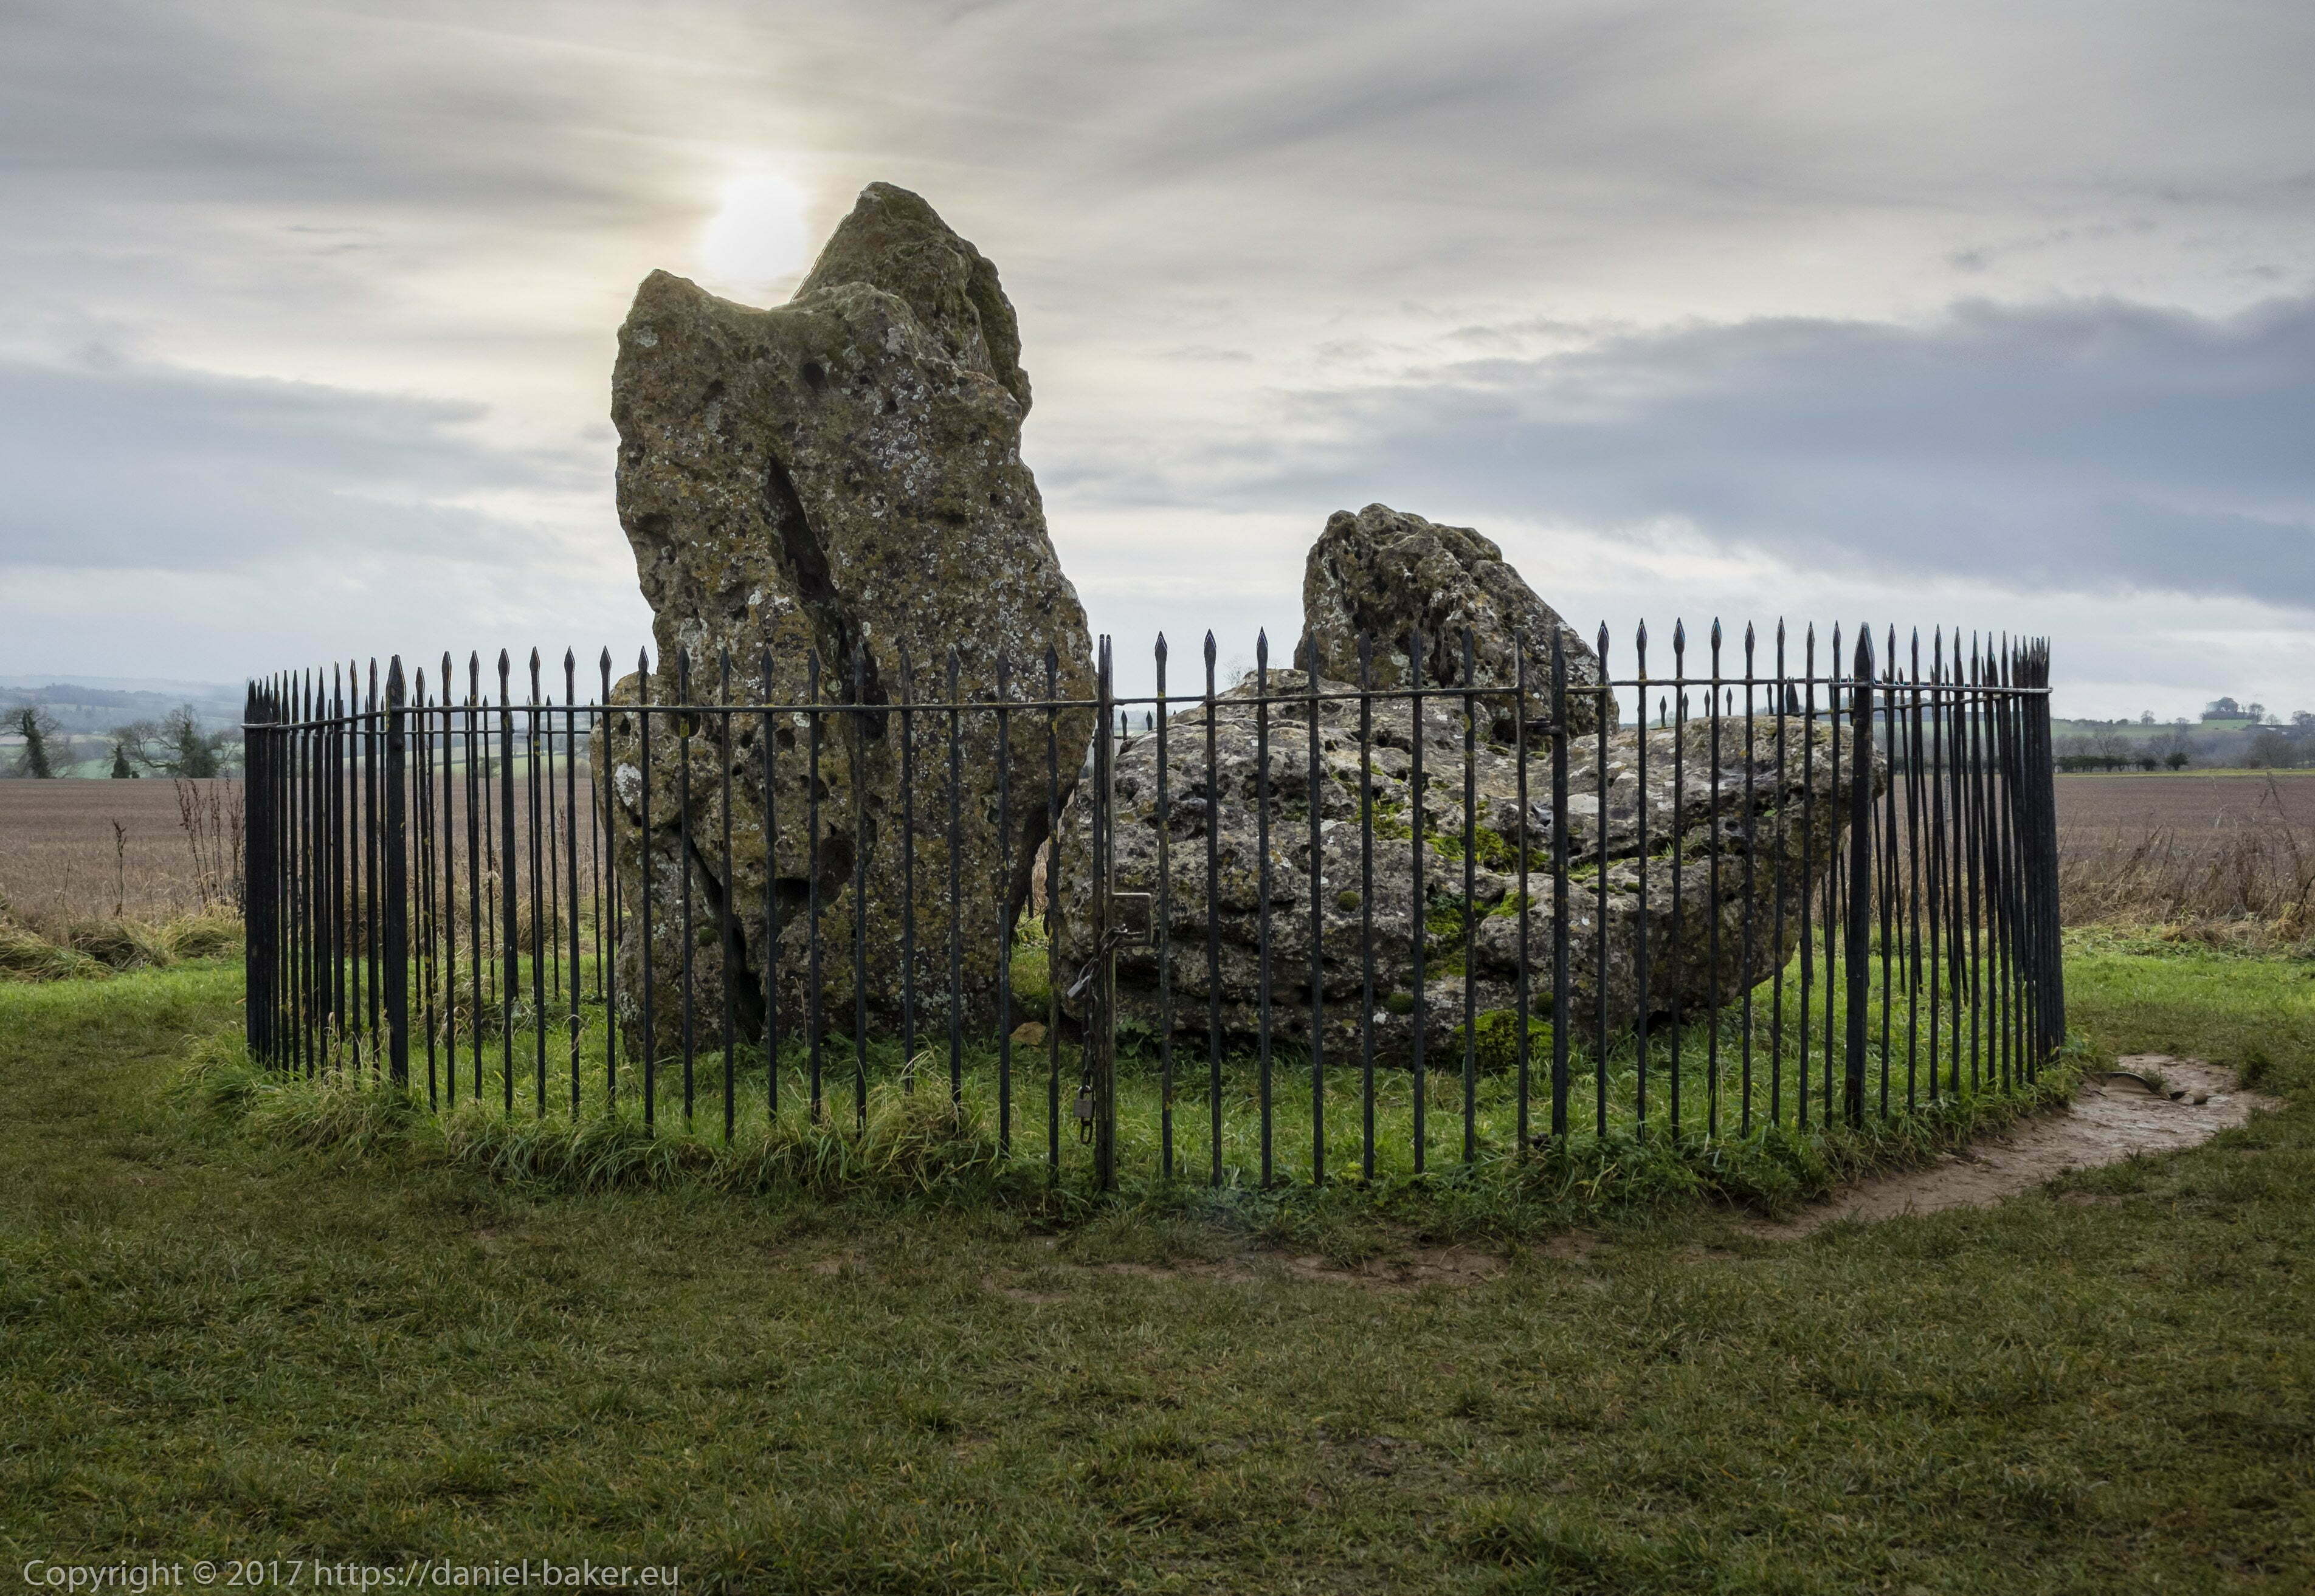 Neolithic stones surrounded by black iron fence with the winter solstice sun shining above